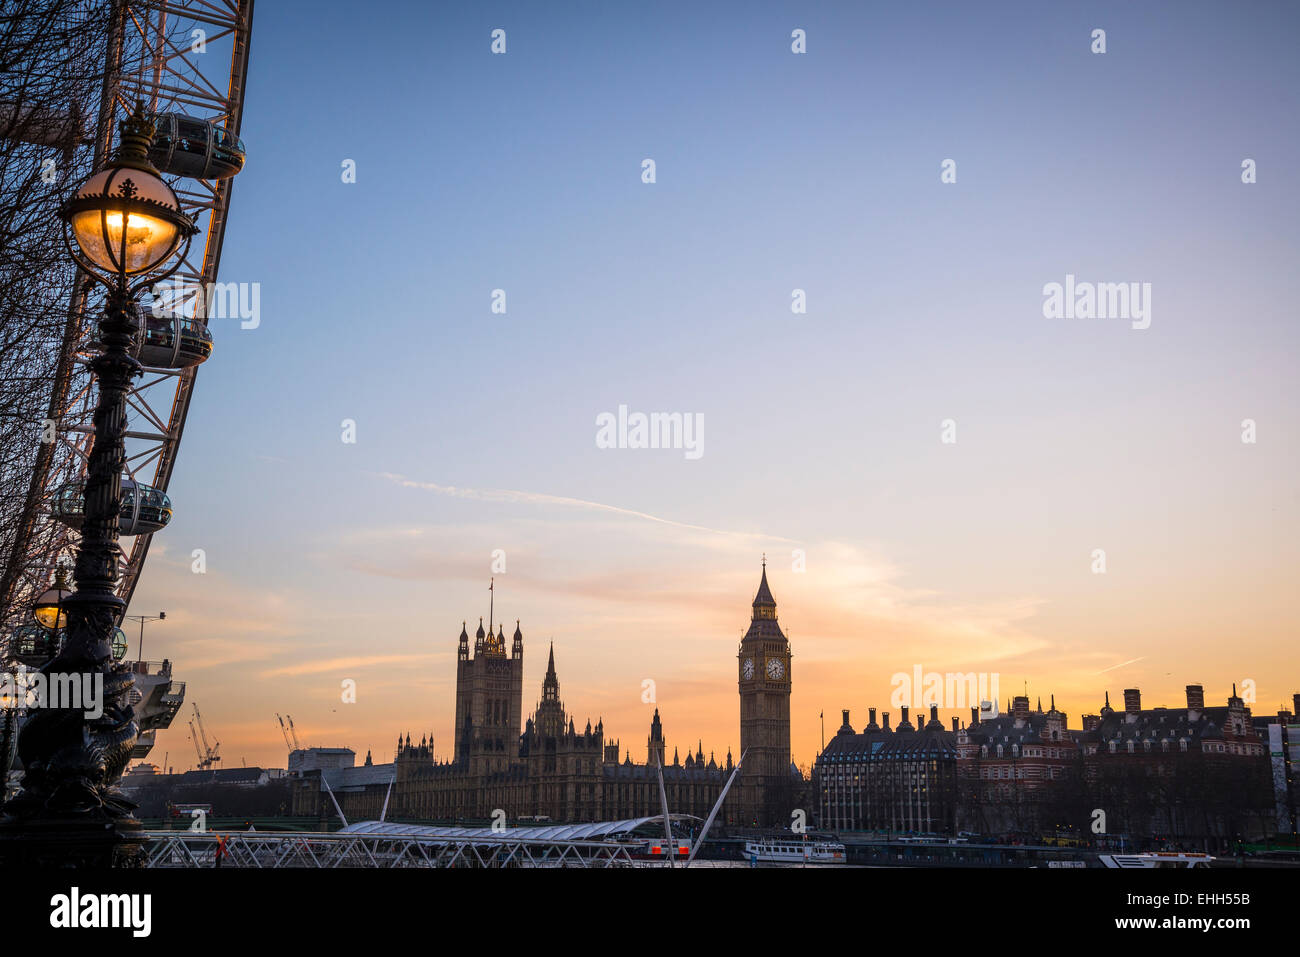 Big Ben and Houses of Parliament at dusk, London, England, Uk Stock Photo